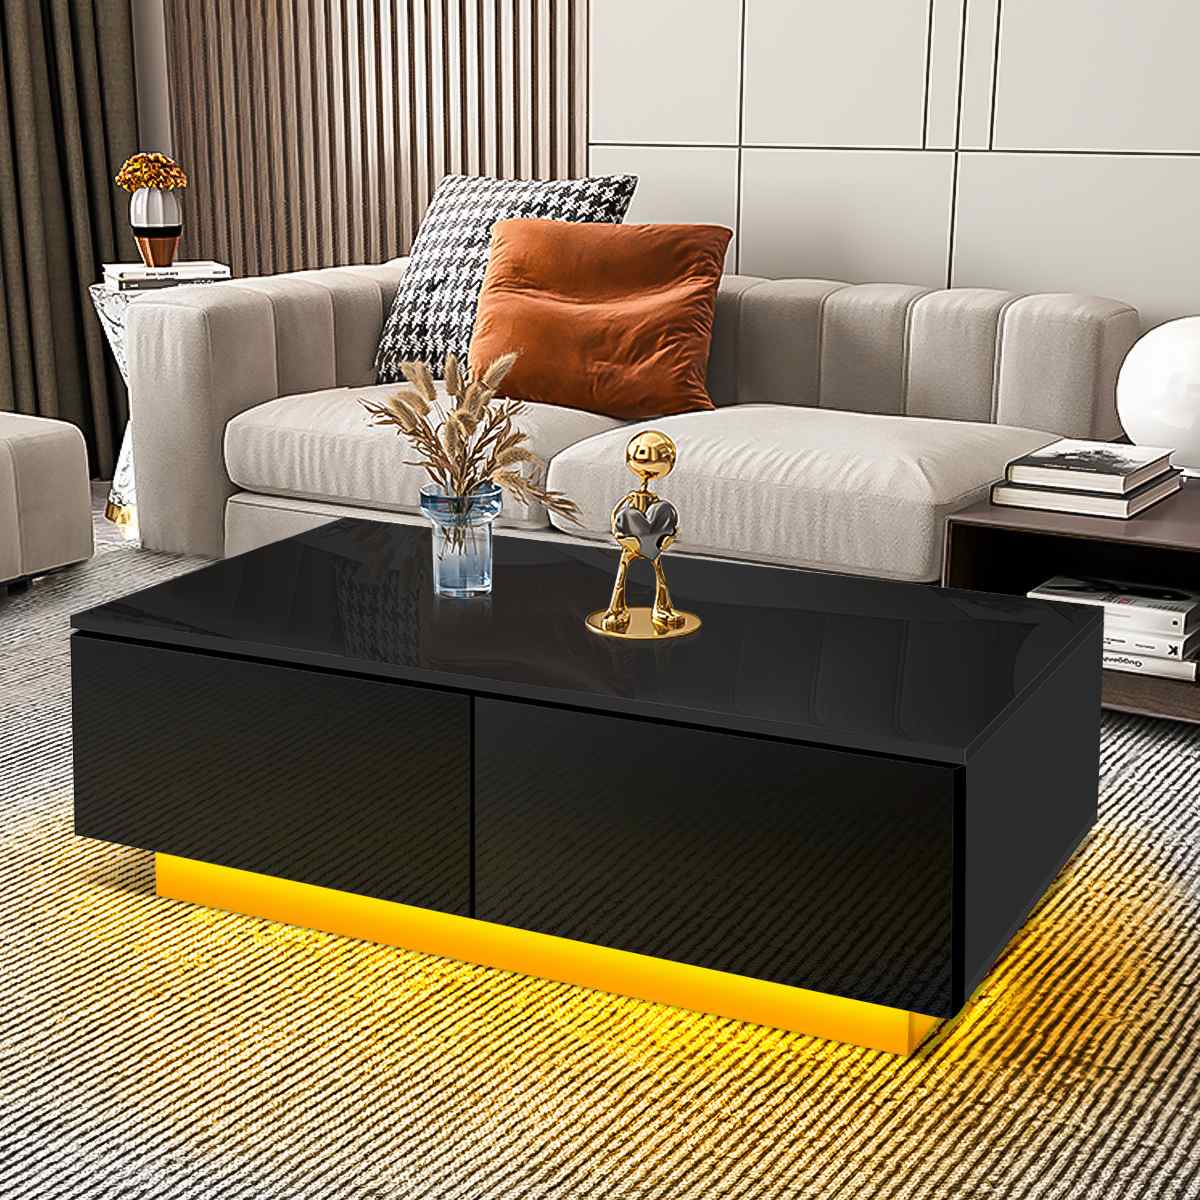 RGB LED Table For Home Office Coffee Table